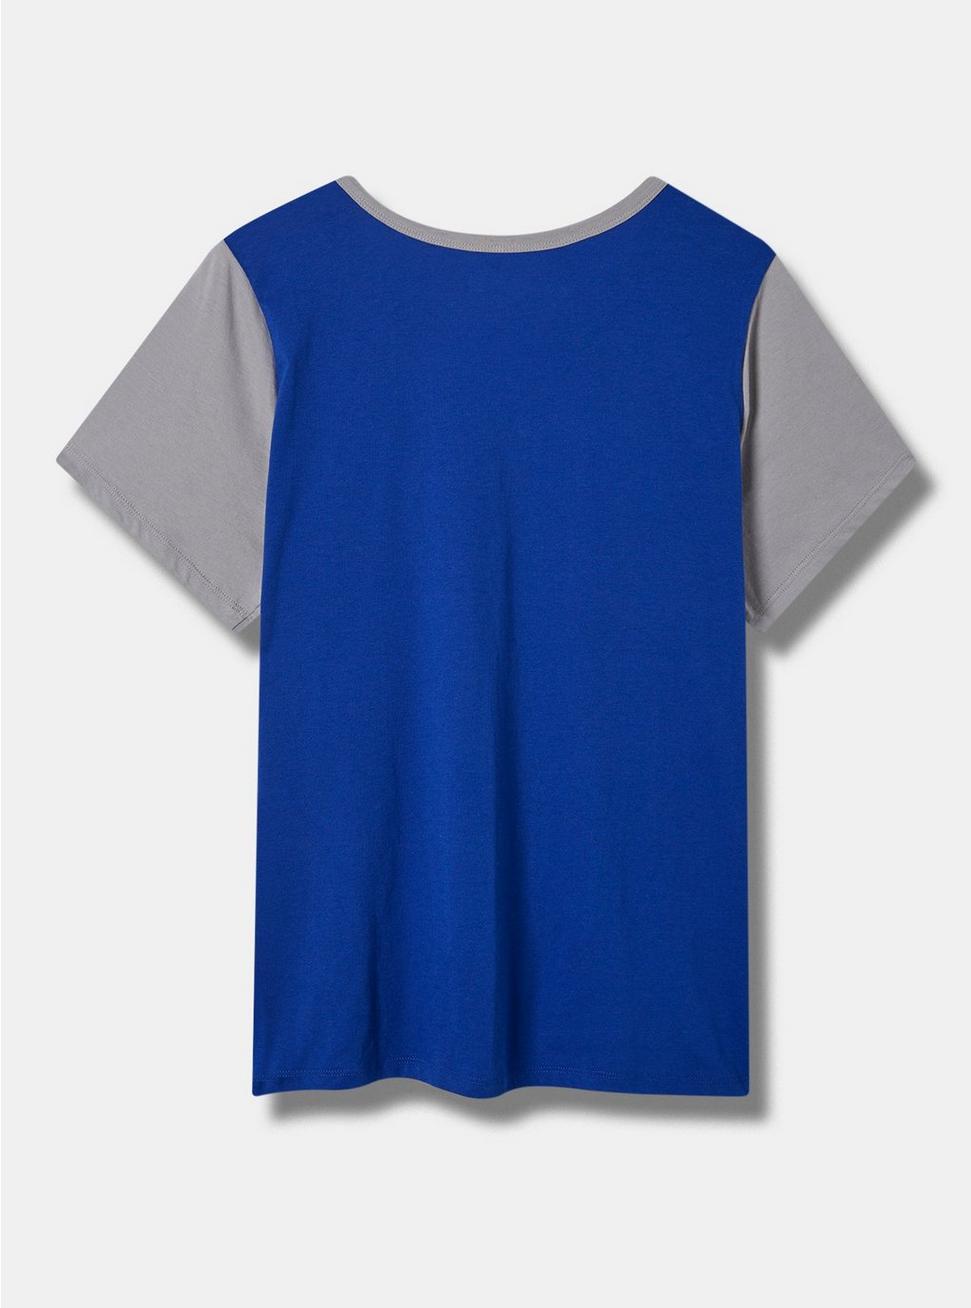 MLB Los Angeles Dodgers Classic Fit Cotton Notch Tee, NAVY, alternate